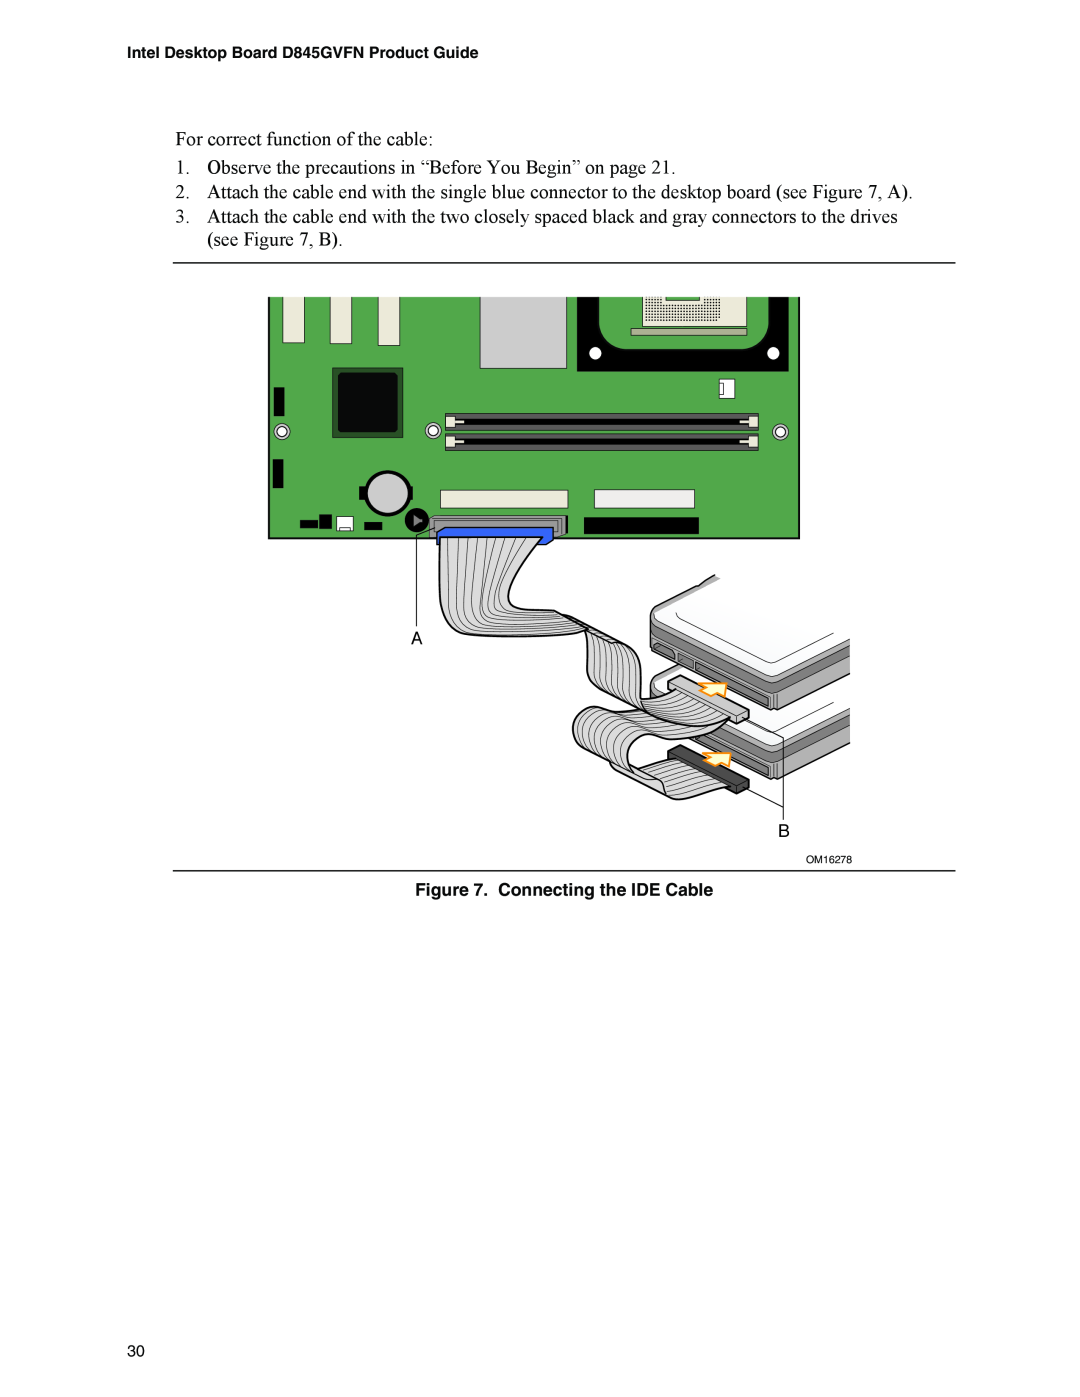 Intel D845GVFN manual For correct function of the cable 